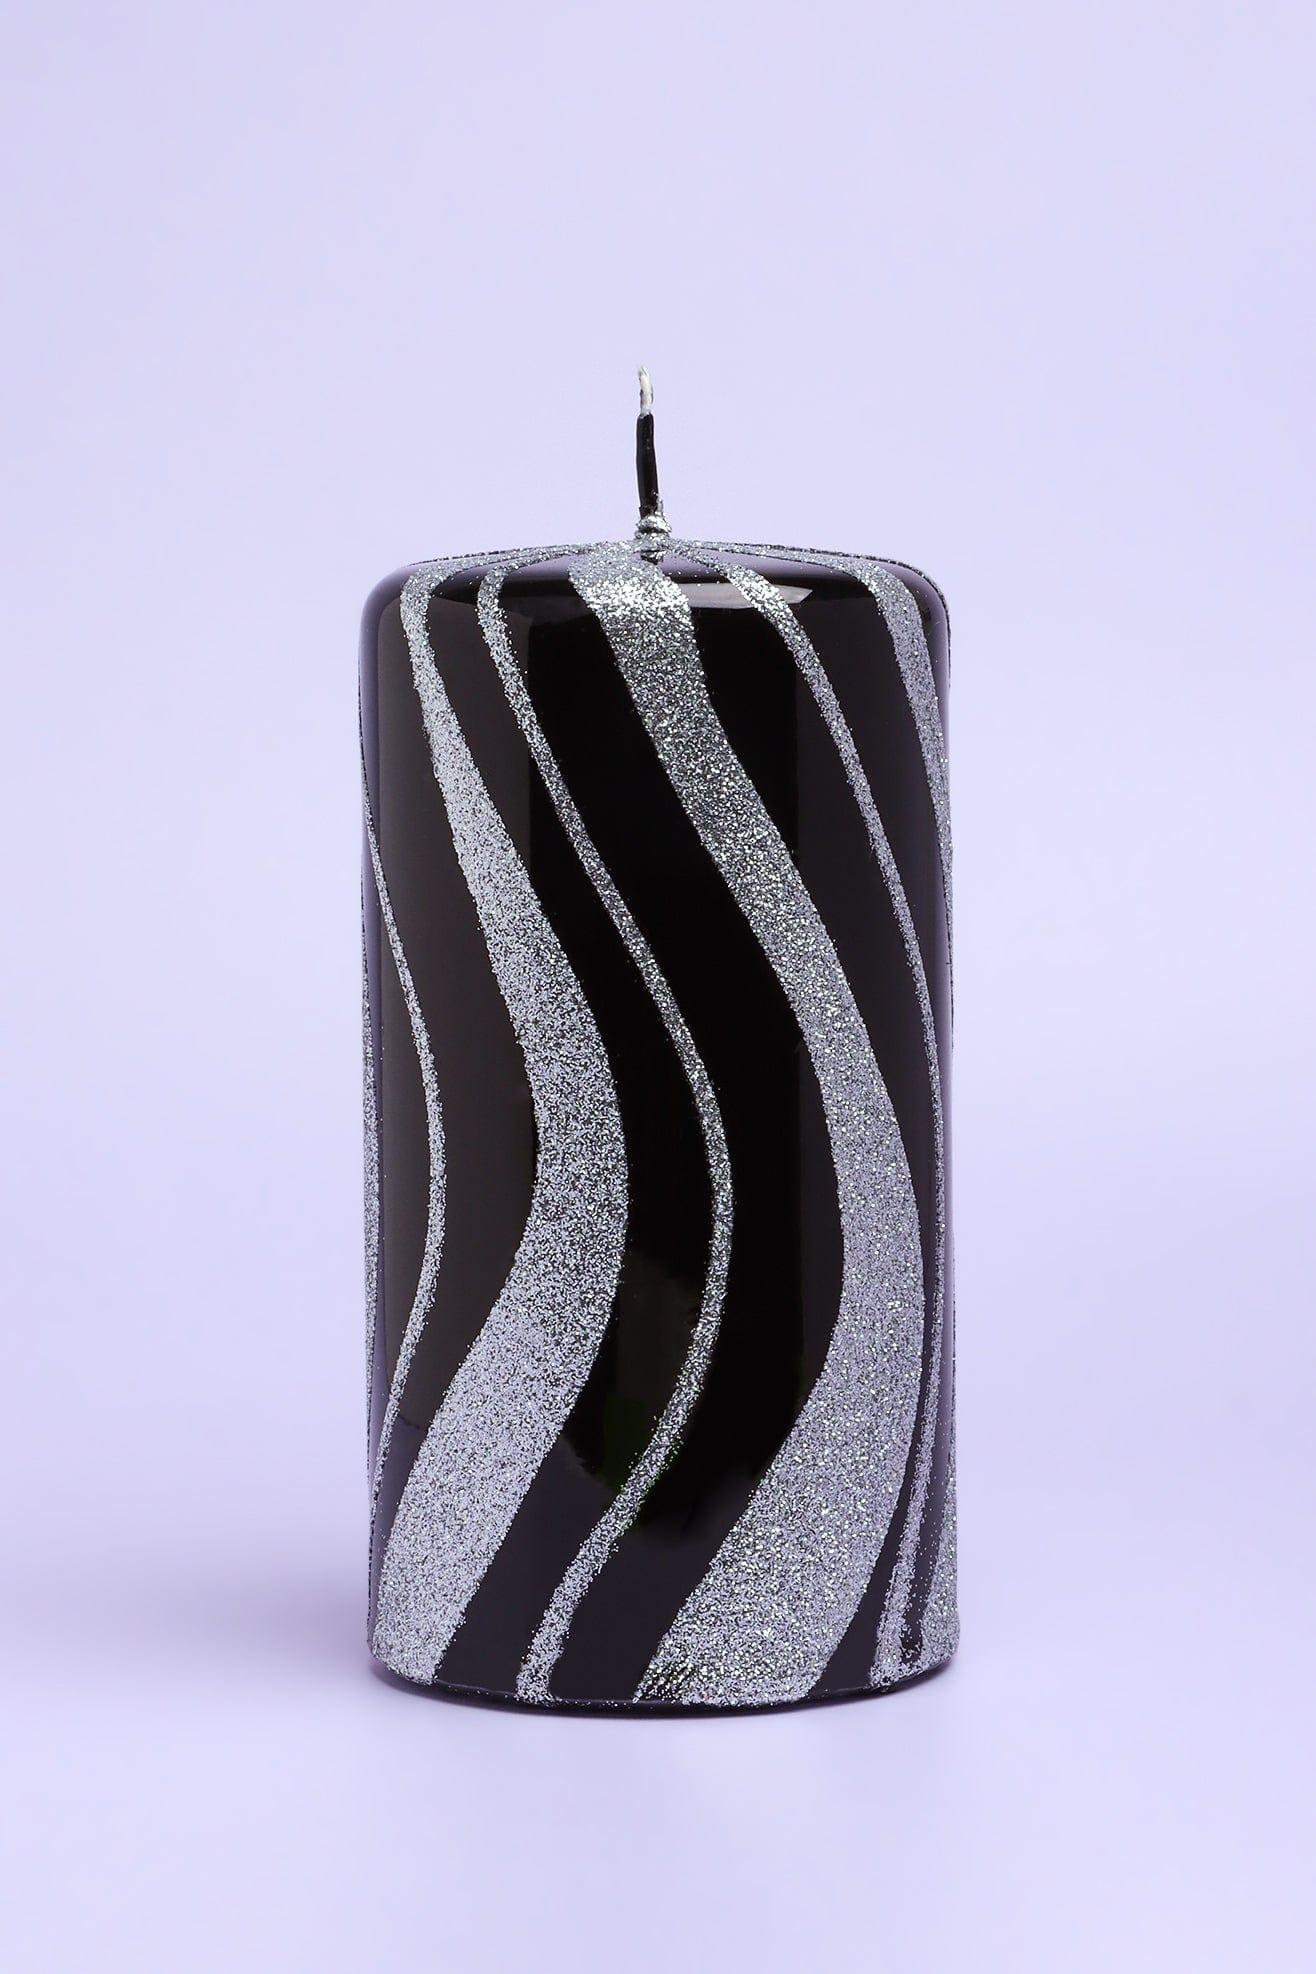 G Decor Candles & Candle Holders Black / Large Pillar Black and Silver Spiral Glitter Glass Effect Reflecting Gloss Pillar Candles